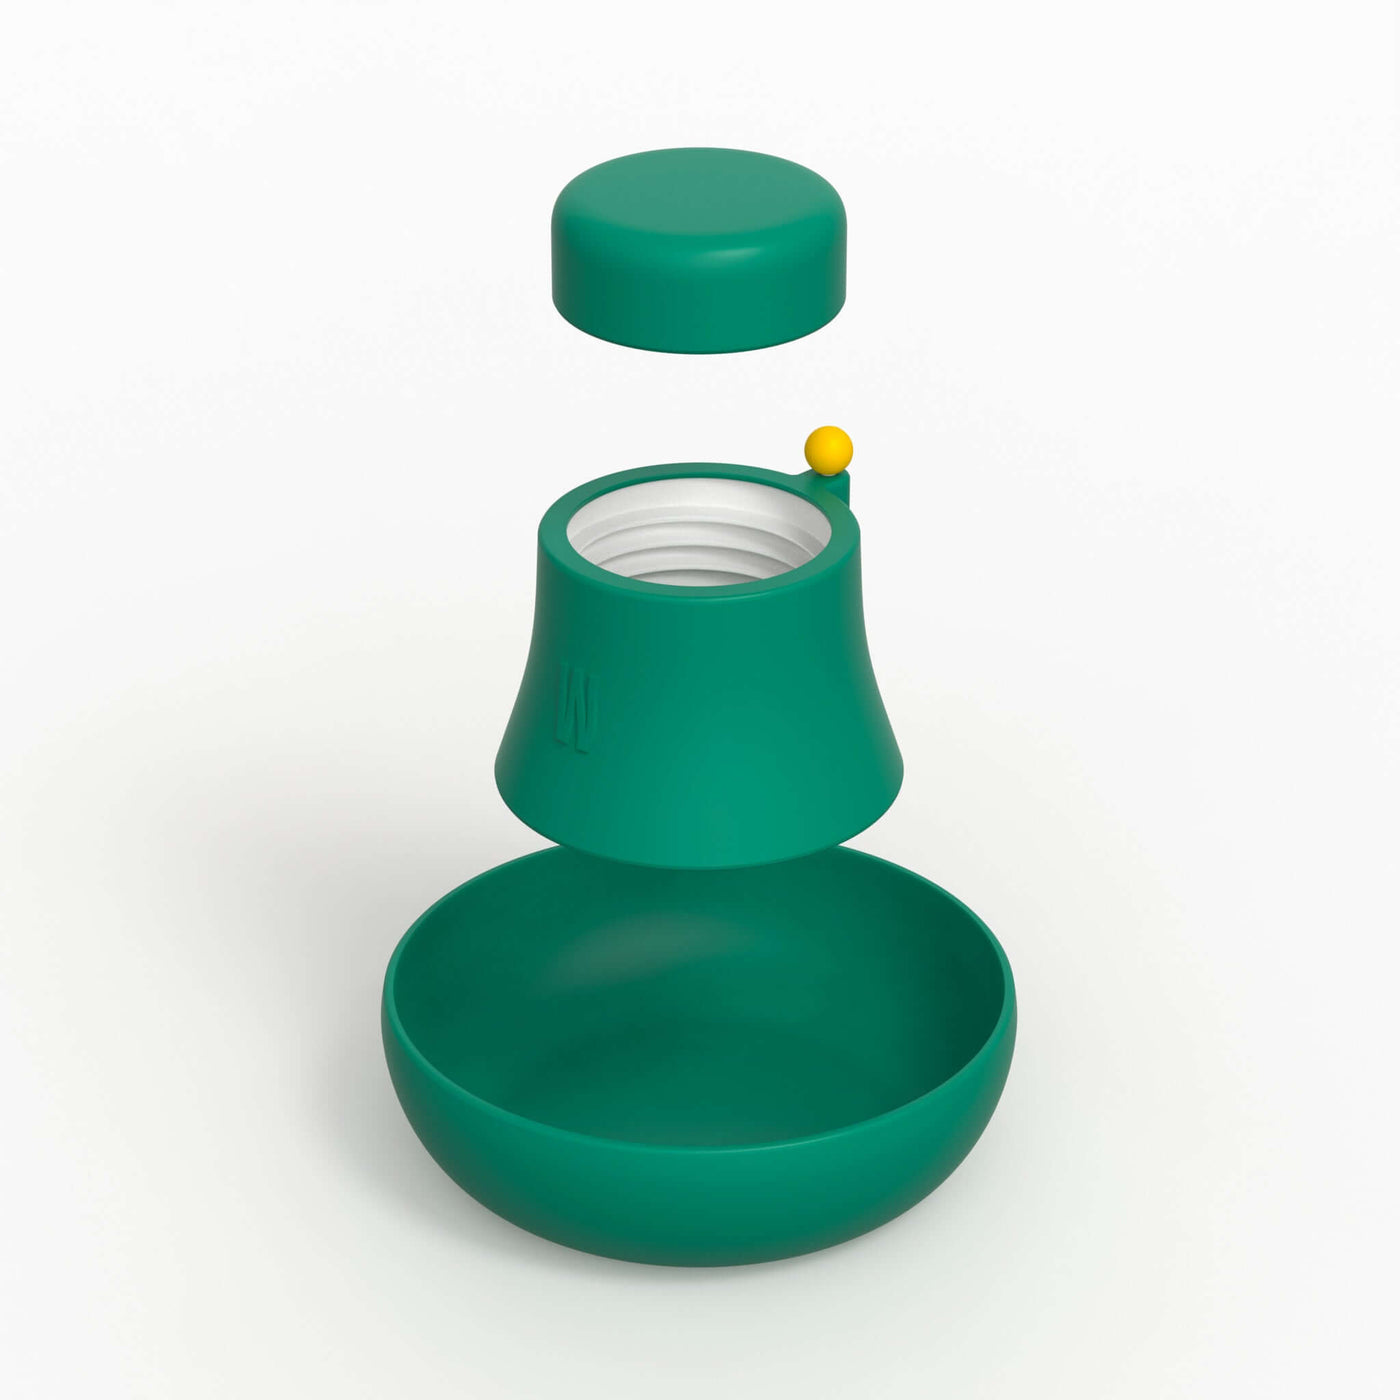 Rendered product photo of forest green silicone covers with a yellow poker.